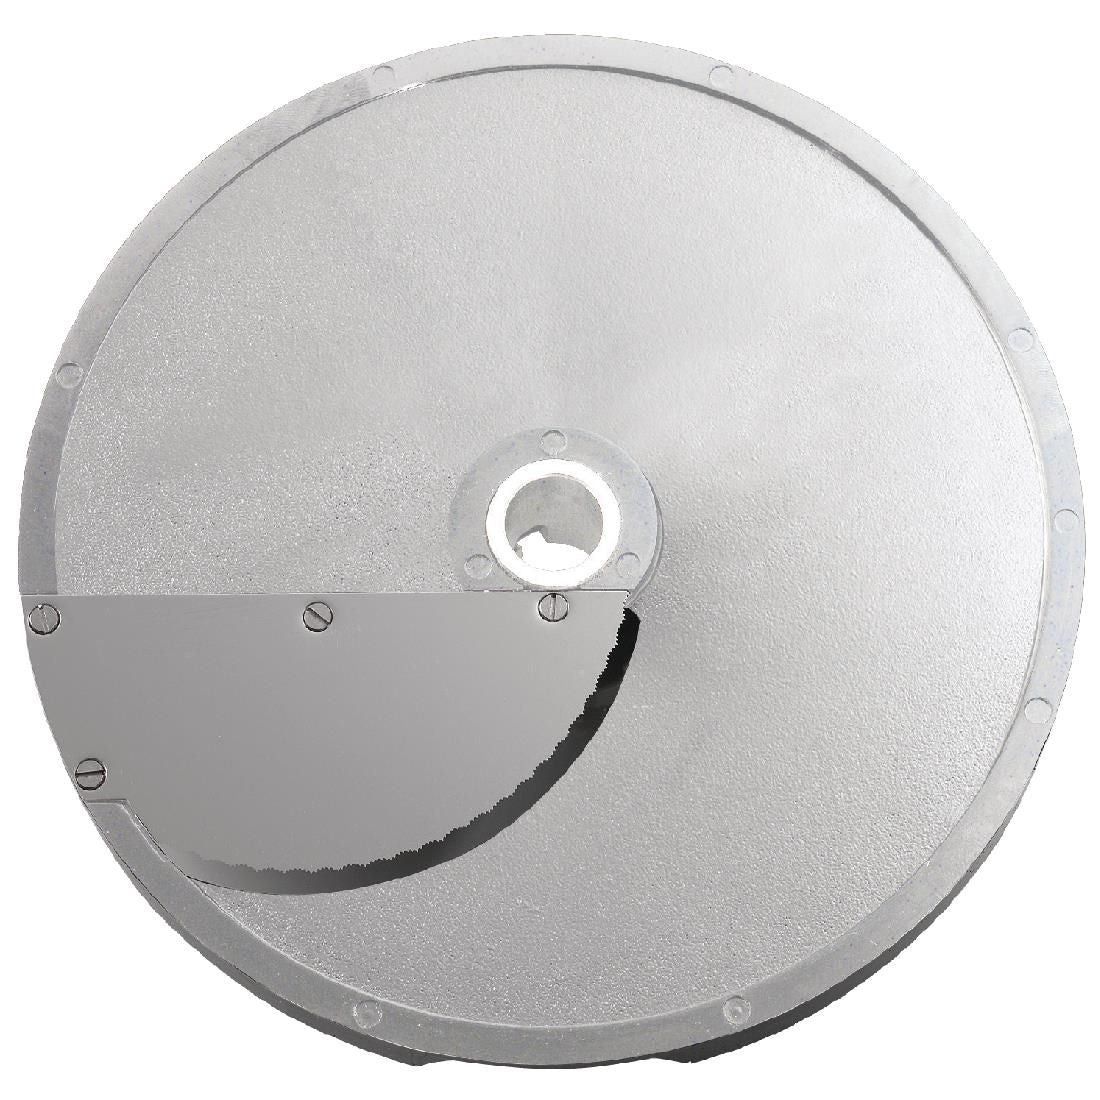 AD695 Electrolux 5mm Cutting Disc Curved Blade 650086 JD Catering Equipment Solutions Ltd